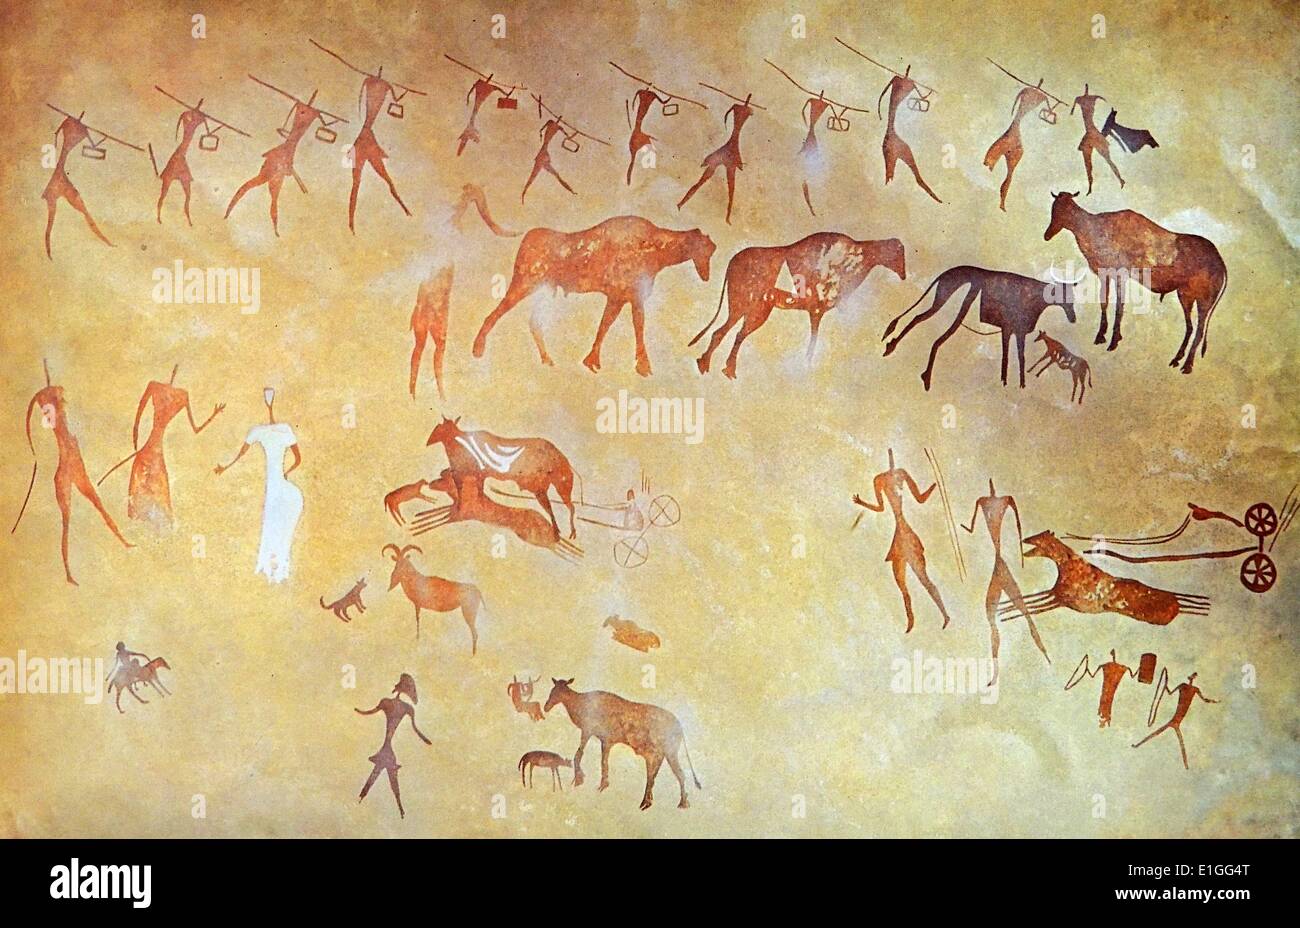 Fresco at Adjefou was painted soon after the invasion of Tassili. The painting depicts trained warriors and the end of the Pastoralists. Stock Photo